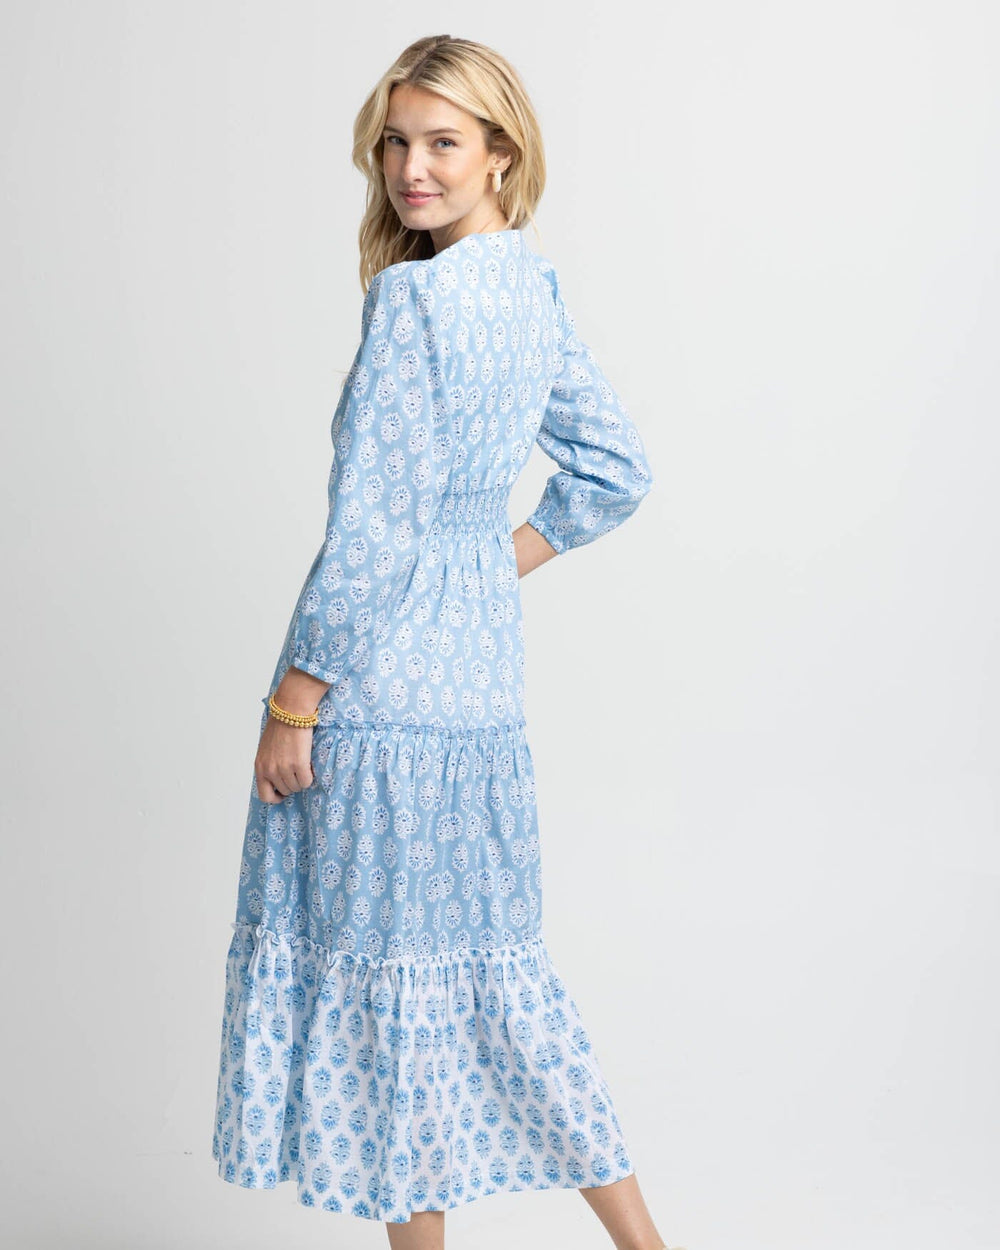 The back view of the Southern Tide Blaire Garden Variety Printed Maxi Dress by Southern Tide - Clearwater Blue